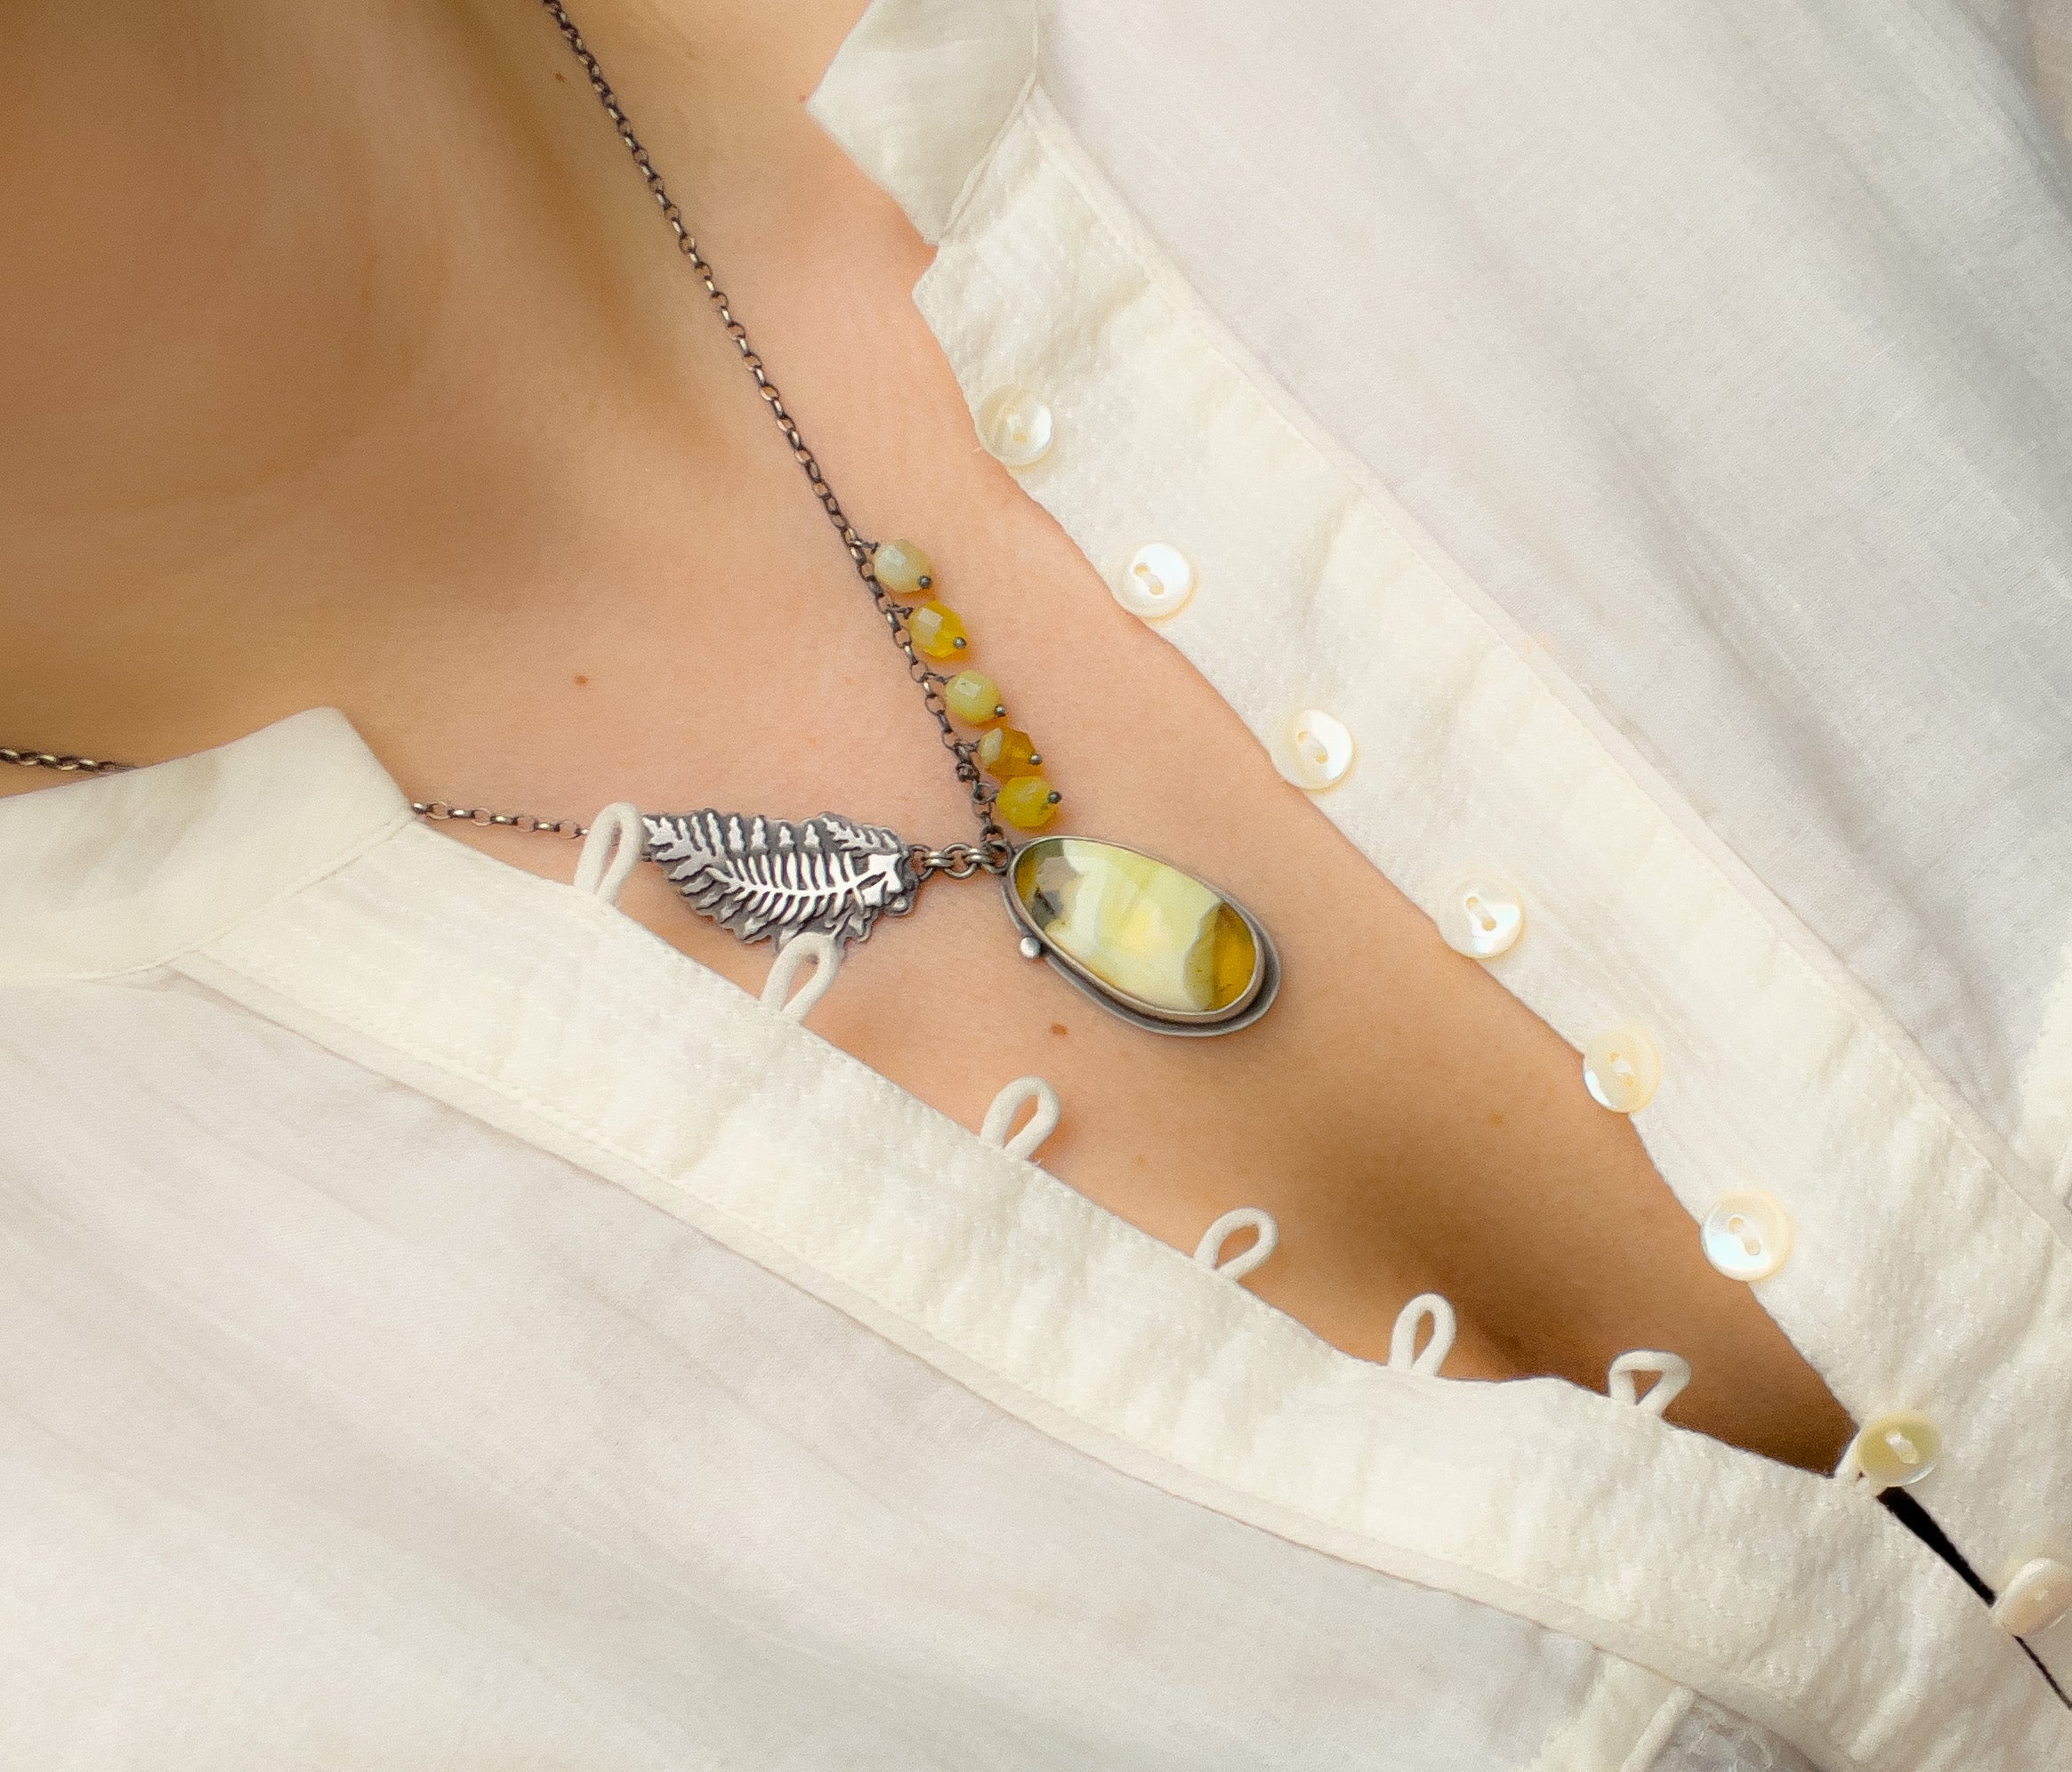 The Amber & Fern Necklace